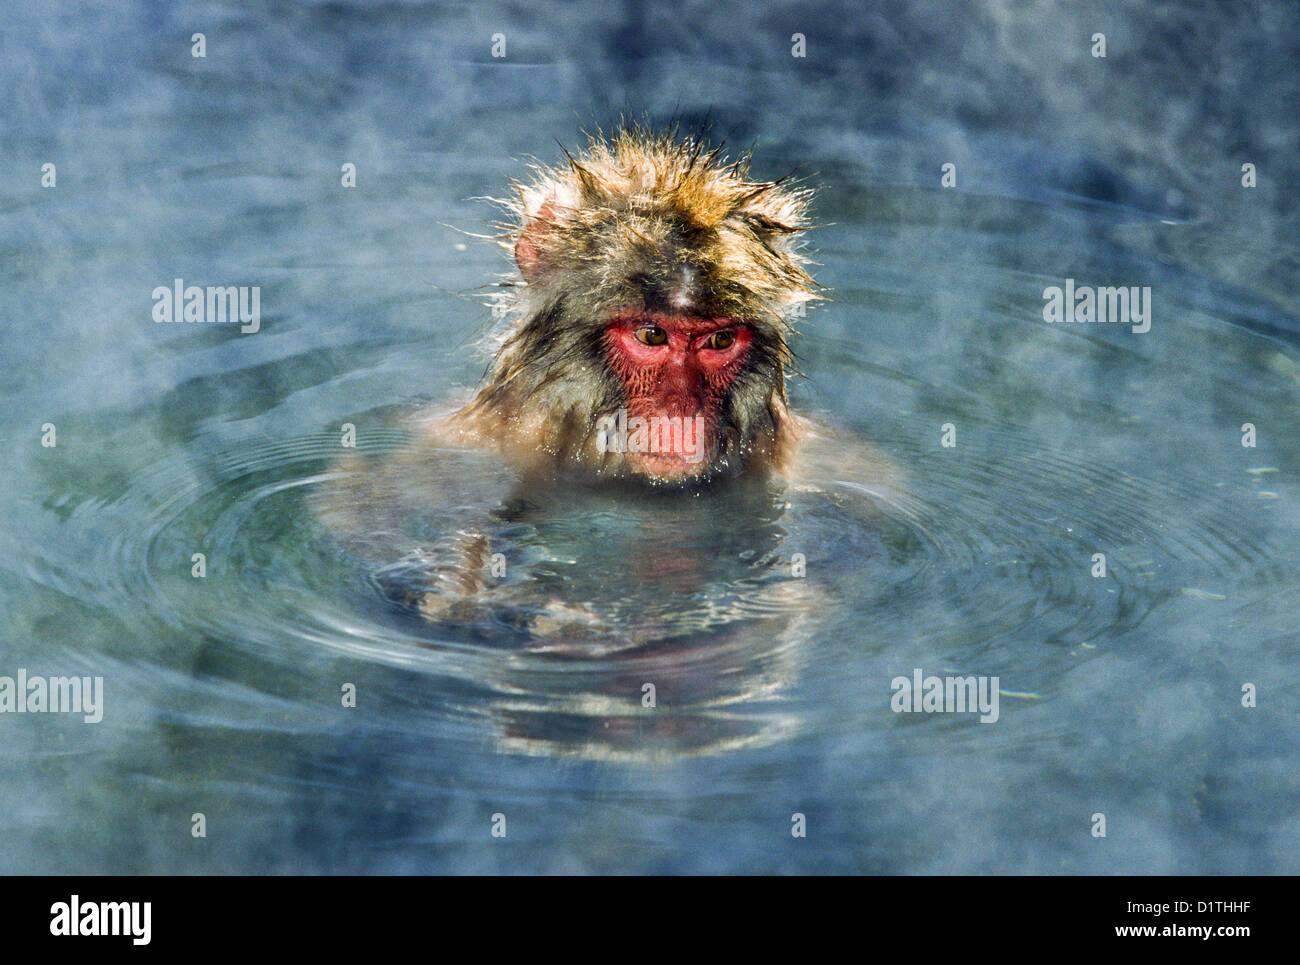 JAPANESE MACAQUE[ MACACA FUSCATA] IN THE JAPANESE ALPS RESTS IN A HOT THERMAL POOL IN WINTER Stock Photo